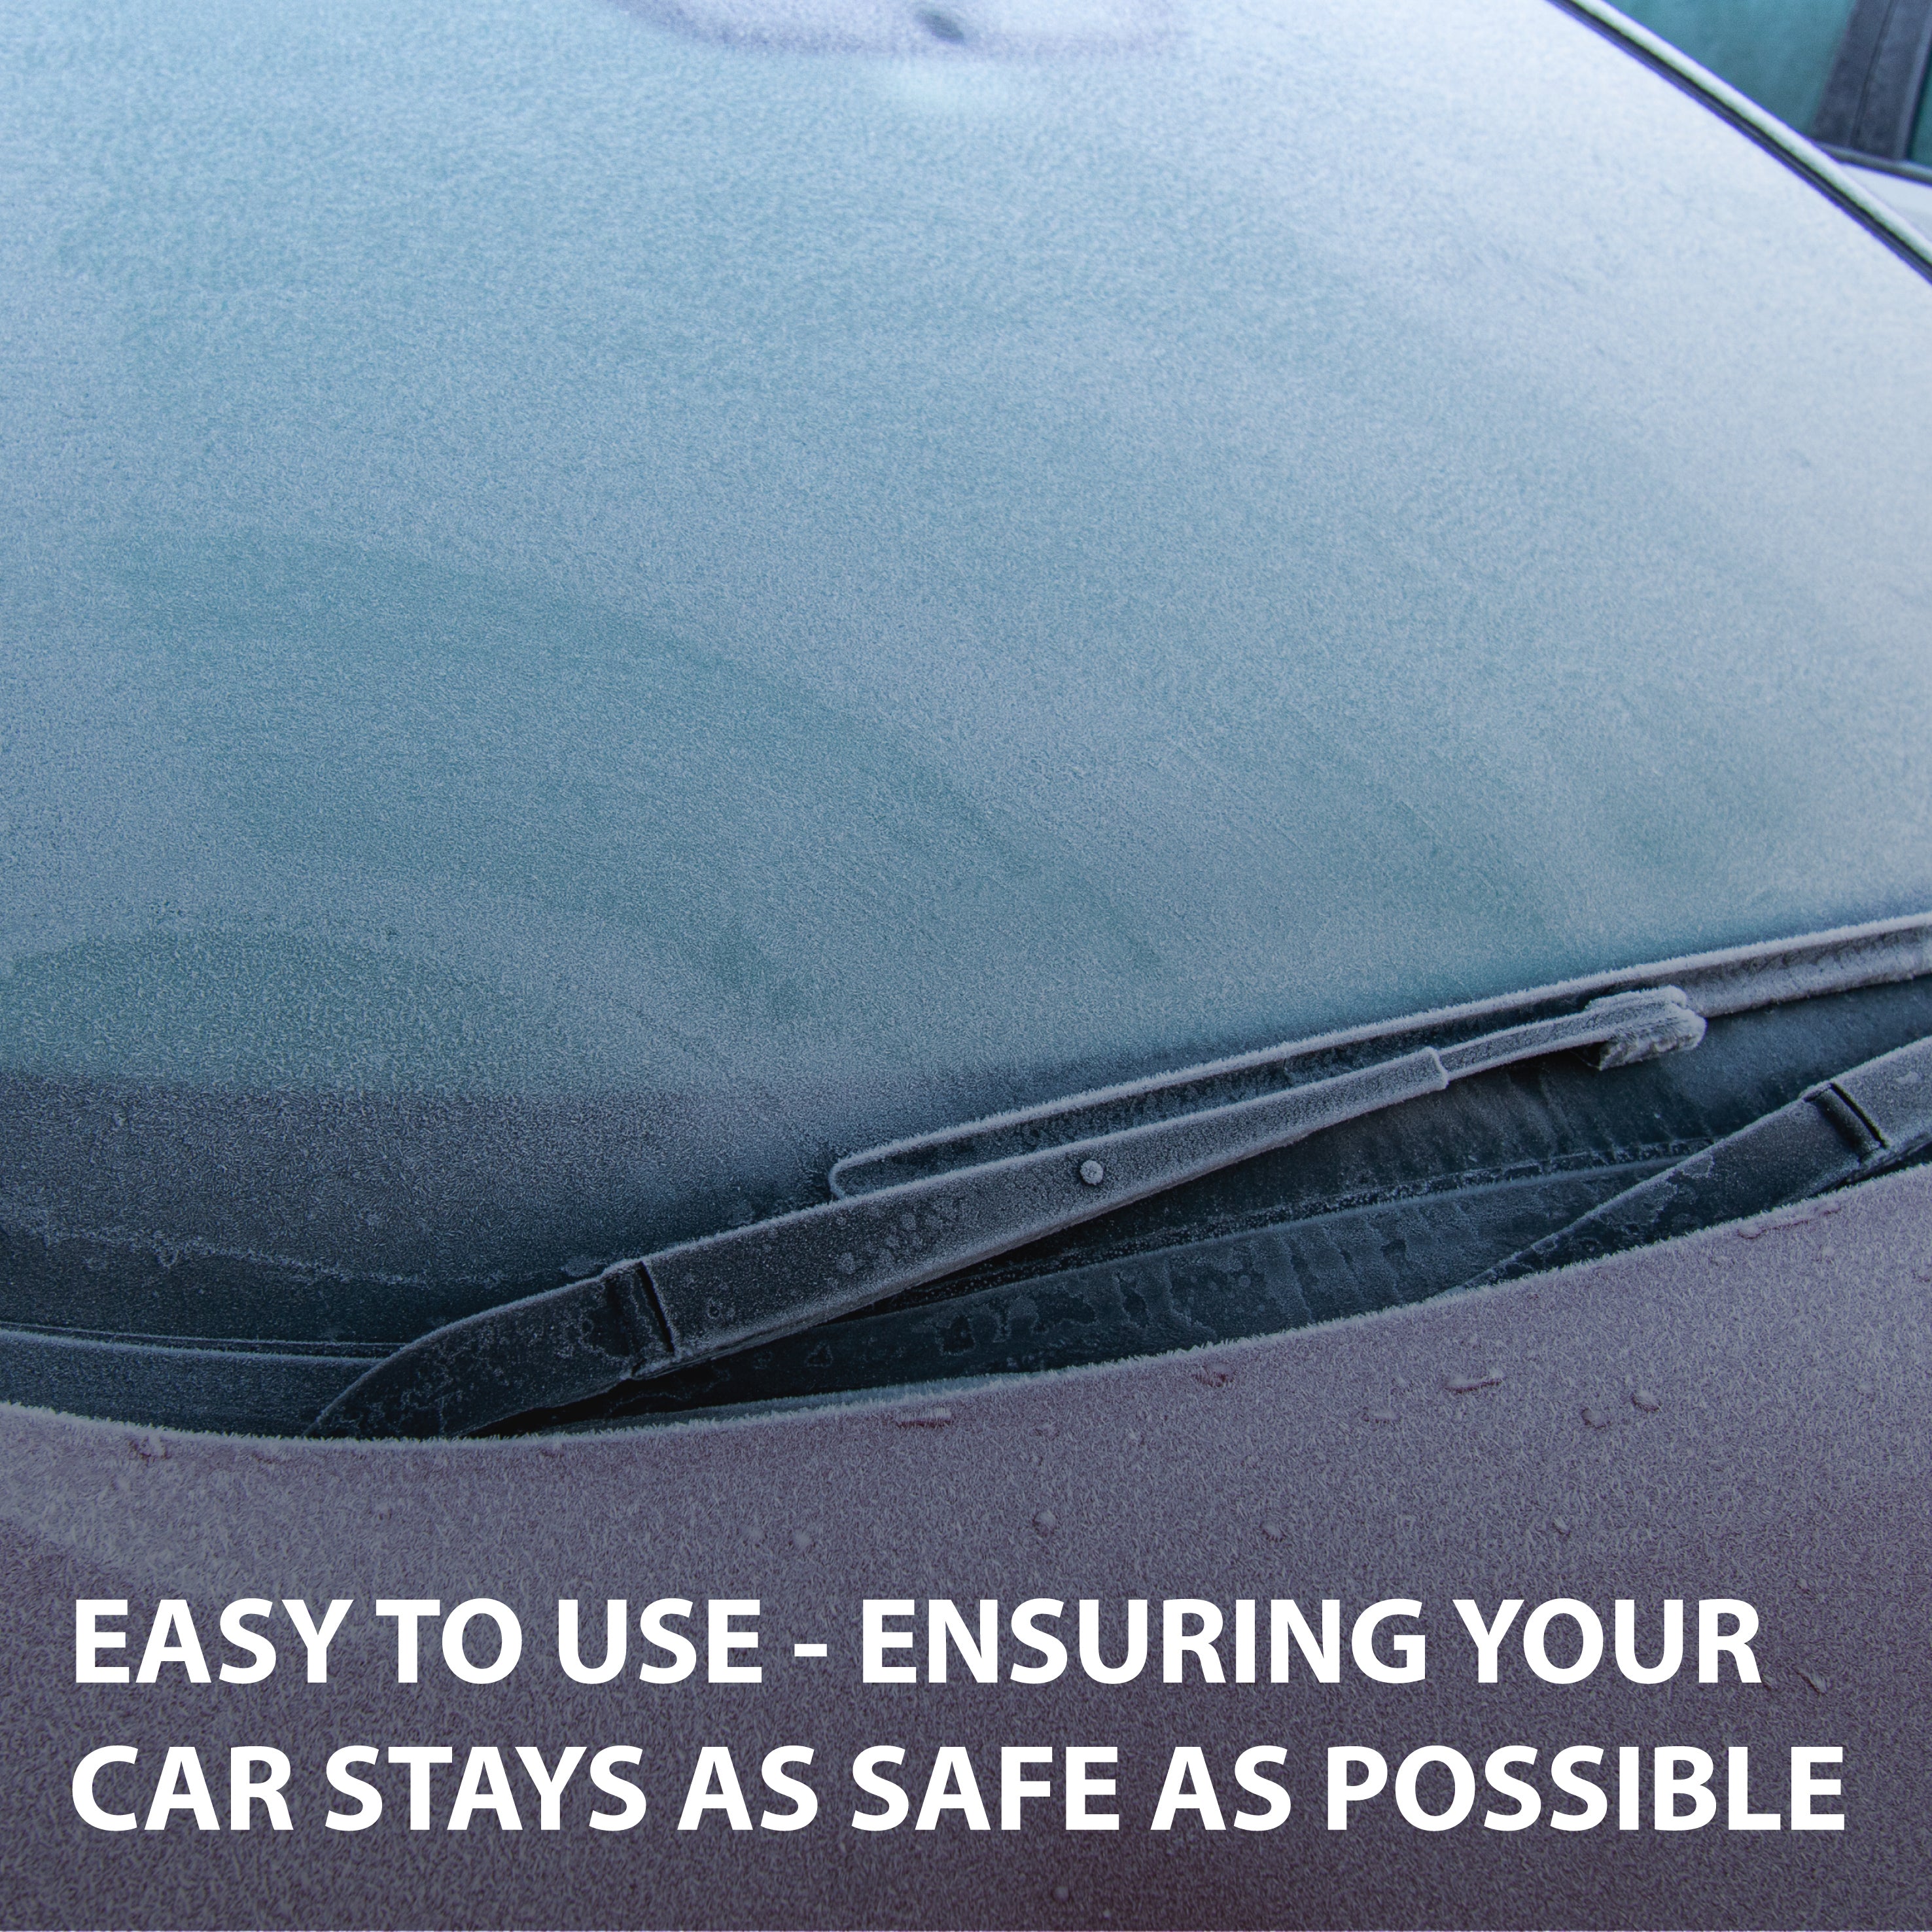 easy to use - ensuring your car stays as safe as possible